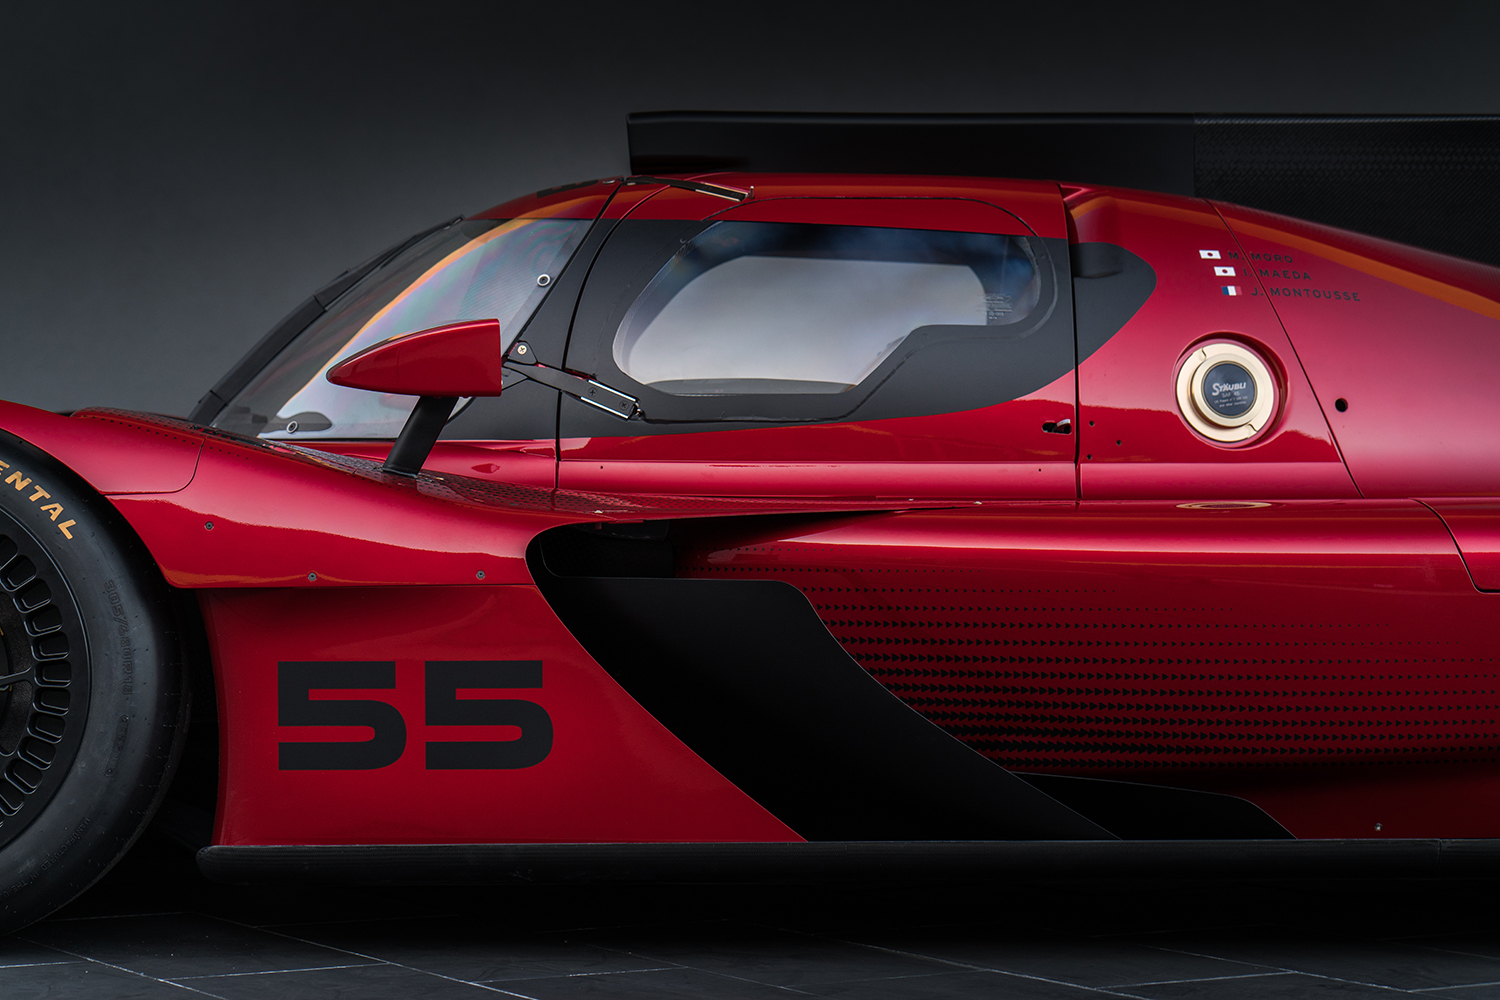 Mazda RT24-P Le Mans racer revealed with 447kW 2.0-litre turbo - photos